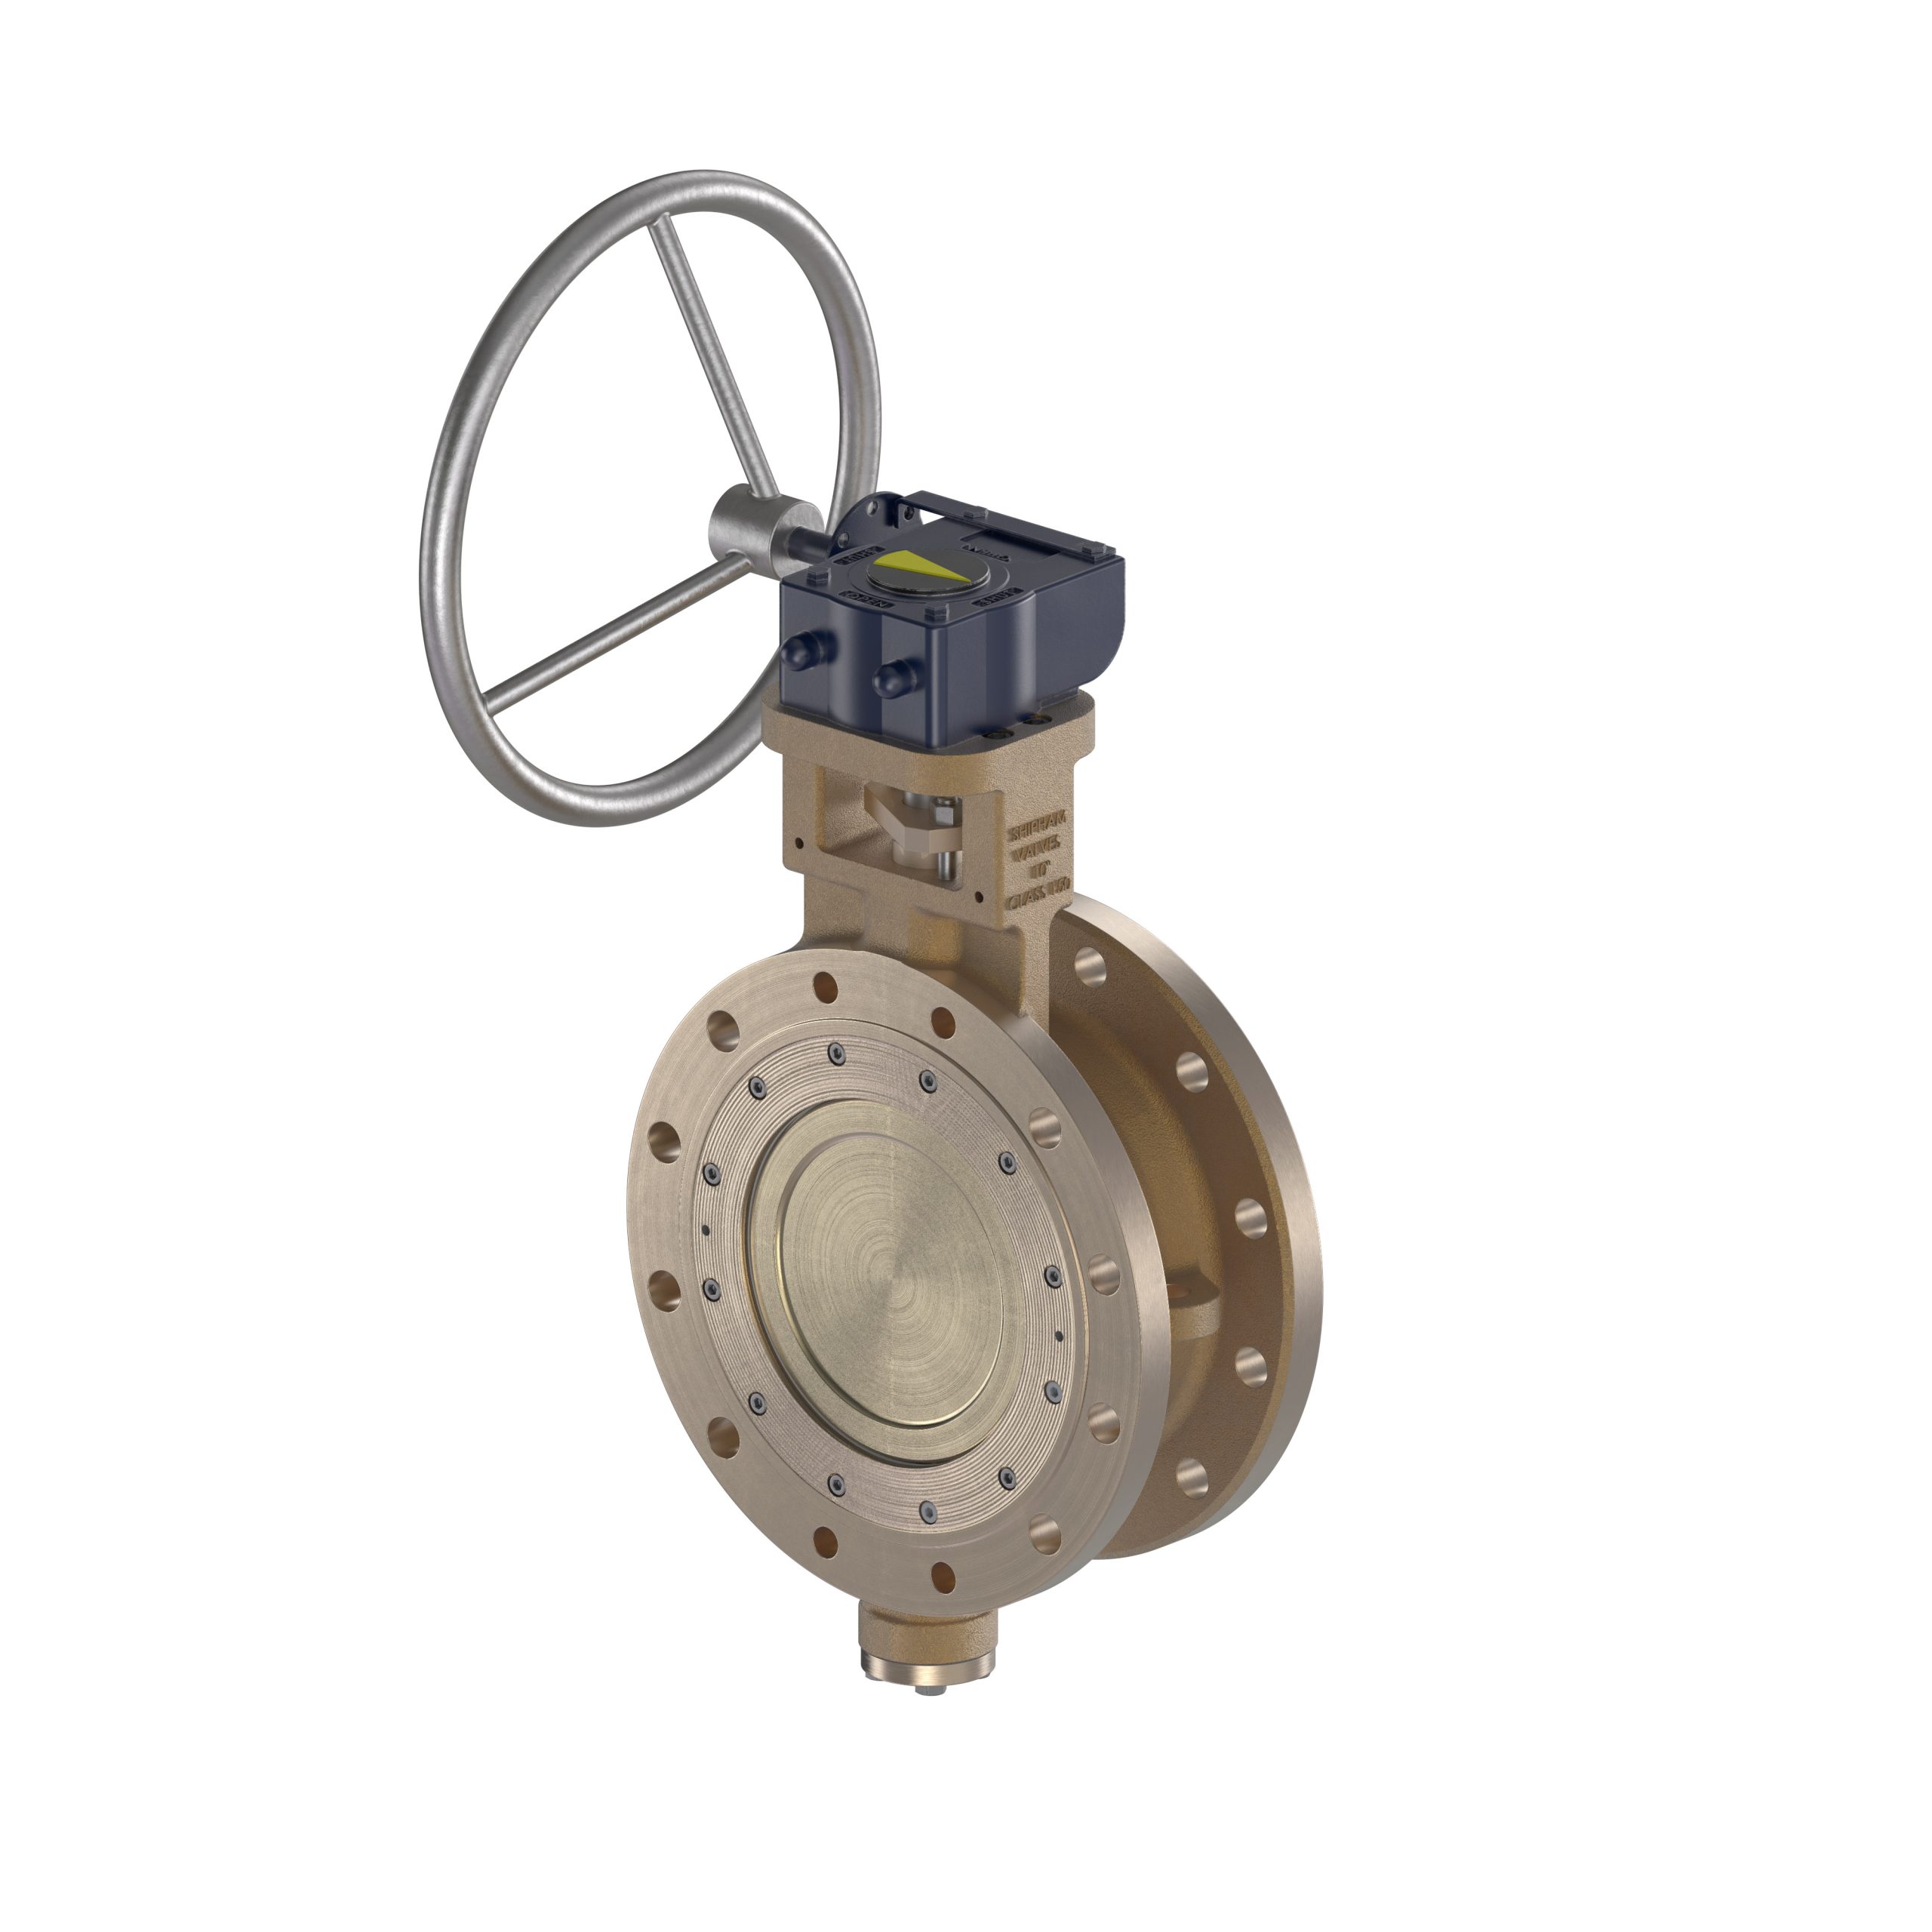 Shipham Valves Double Offset Butterfly Valve with double flanged body BU03